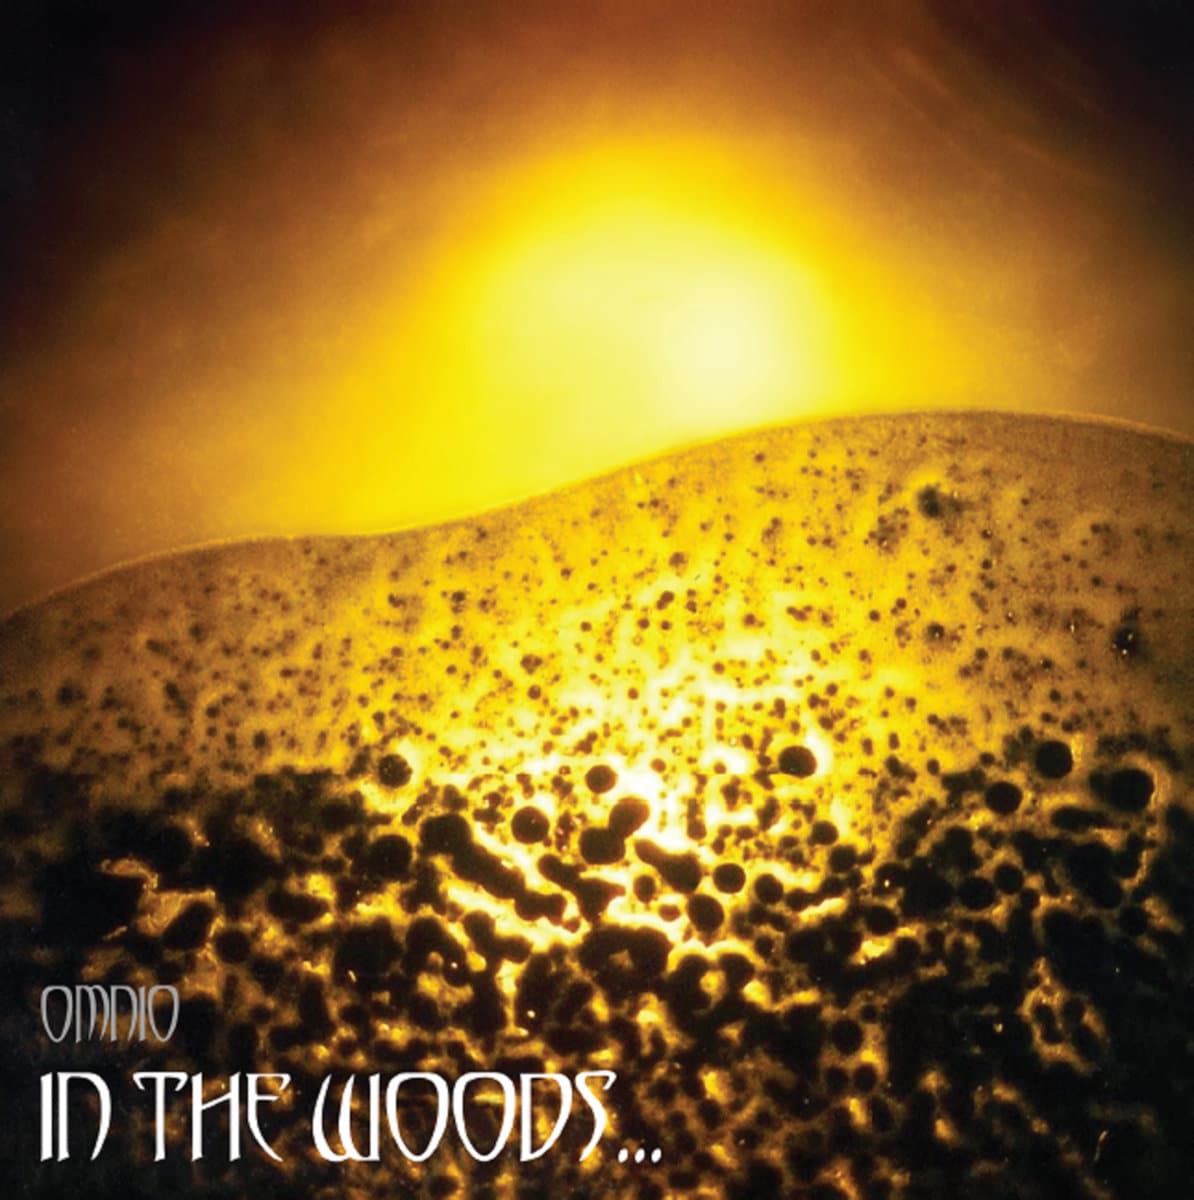 In the Woods - Omnio